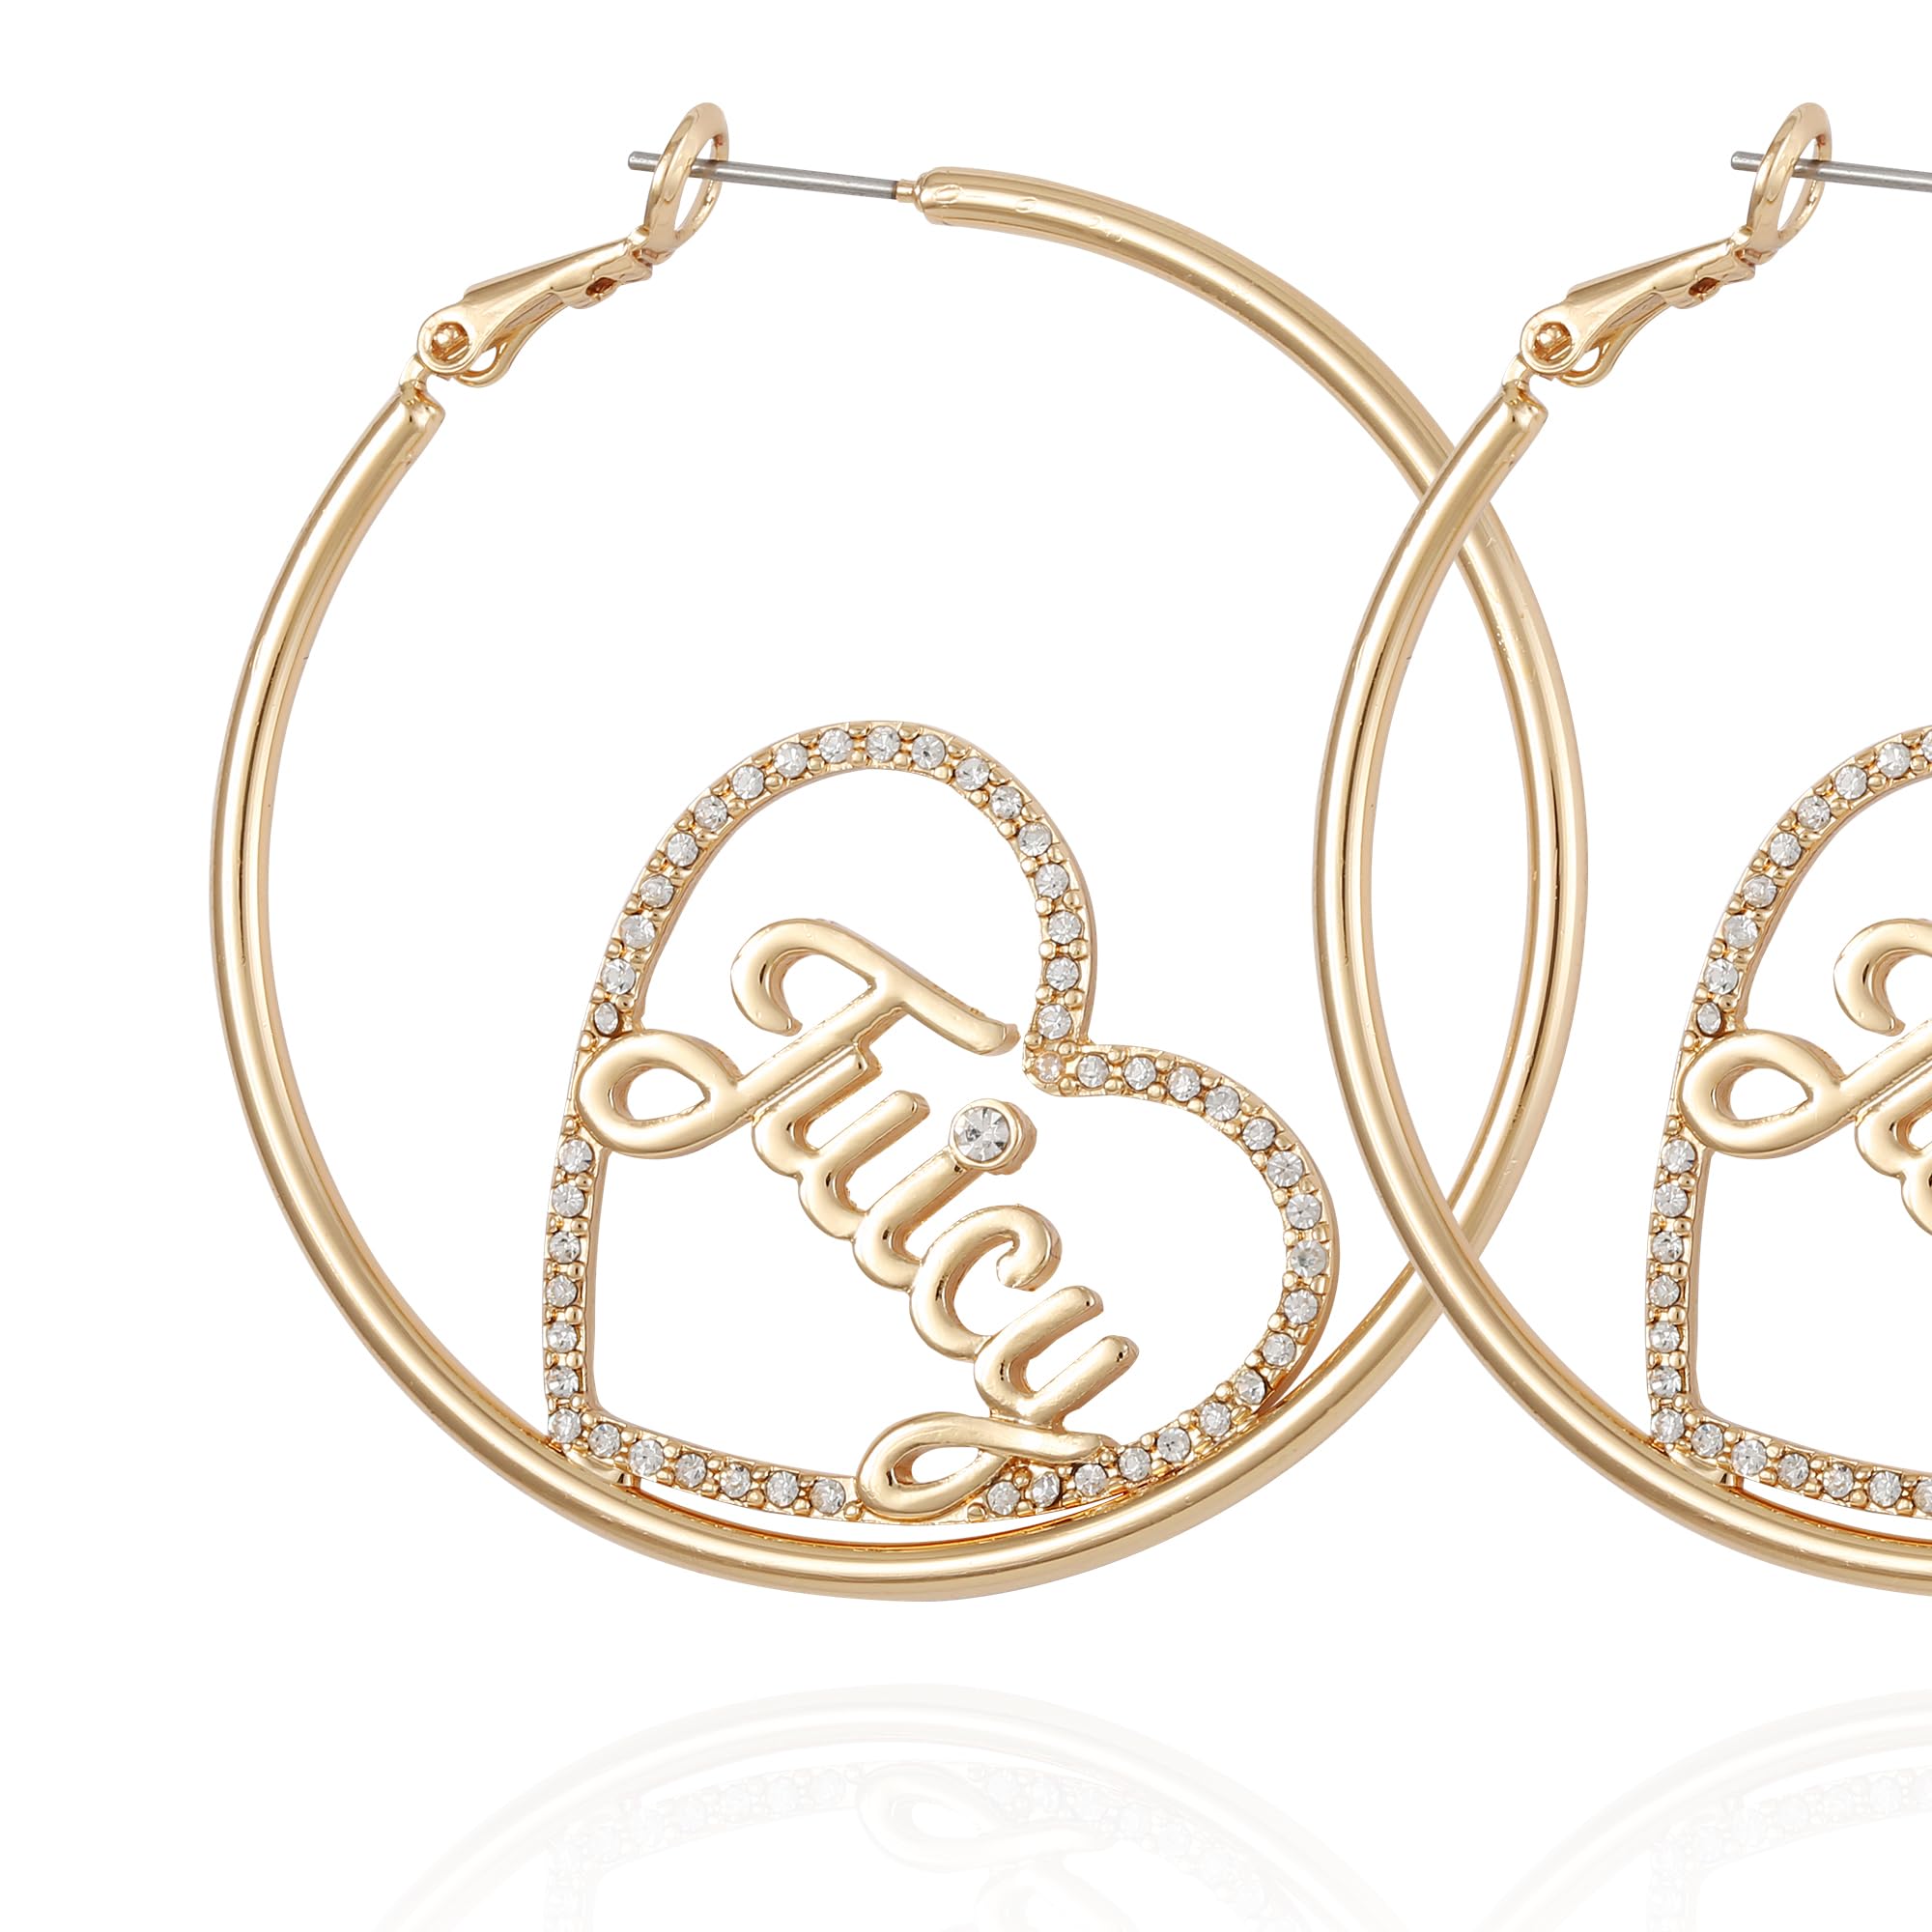 Juicy Couture Goldtone Heart and Signature Logo Hoop Earrings For Women